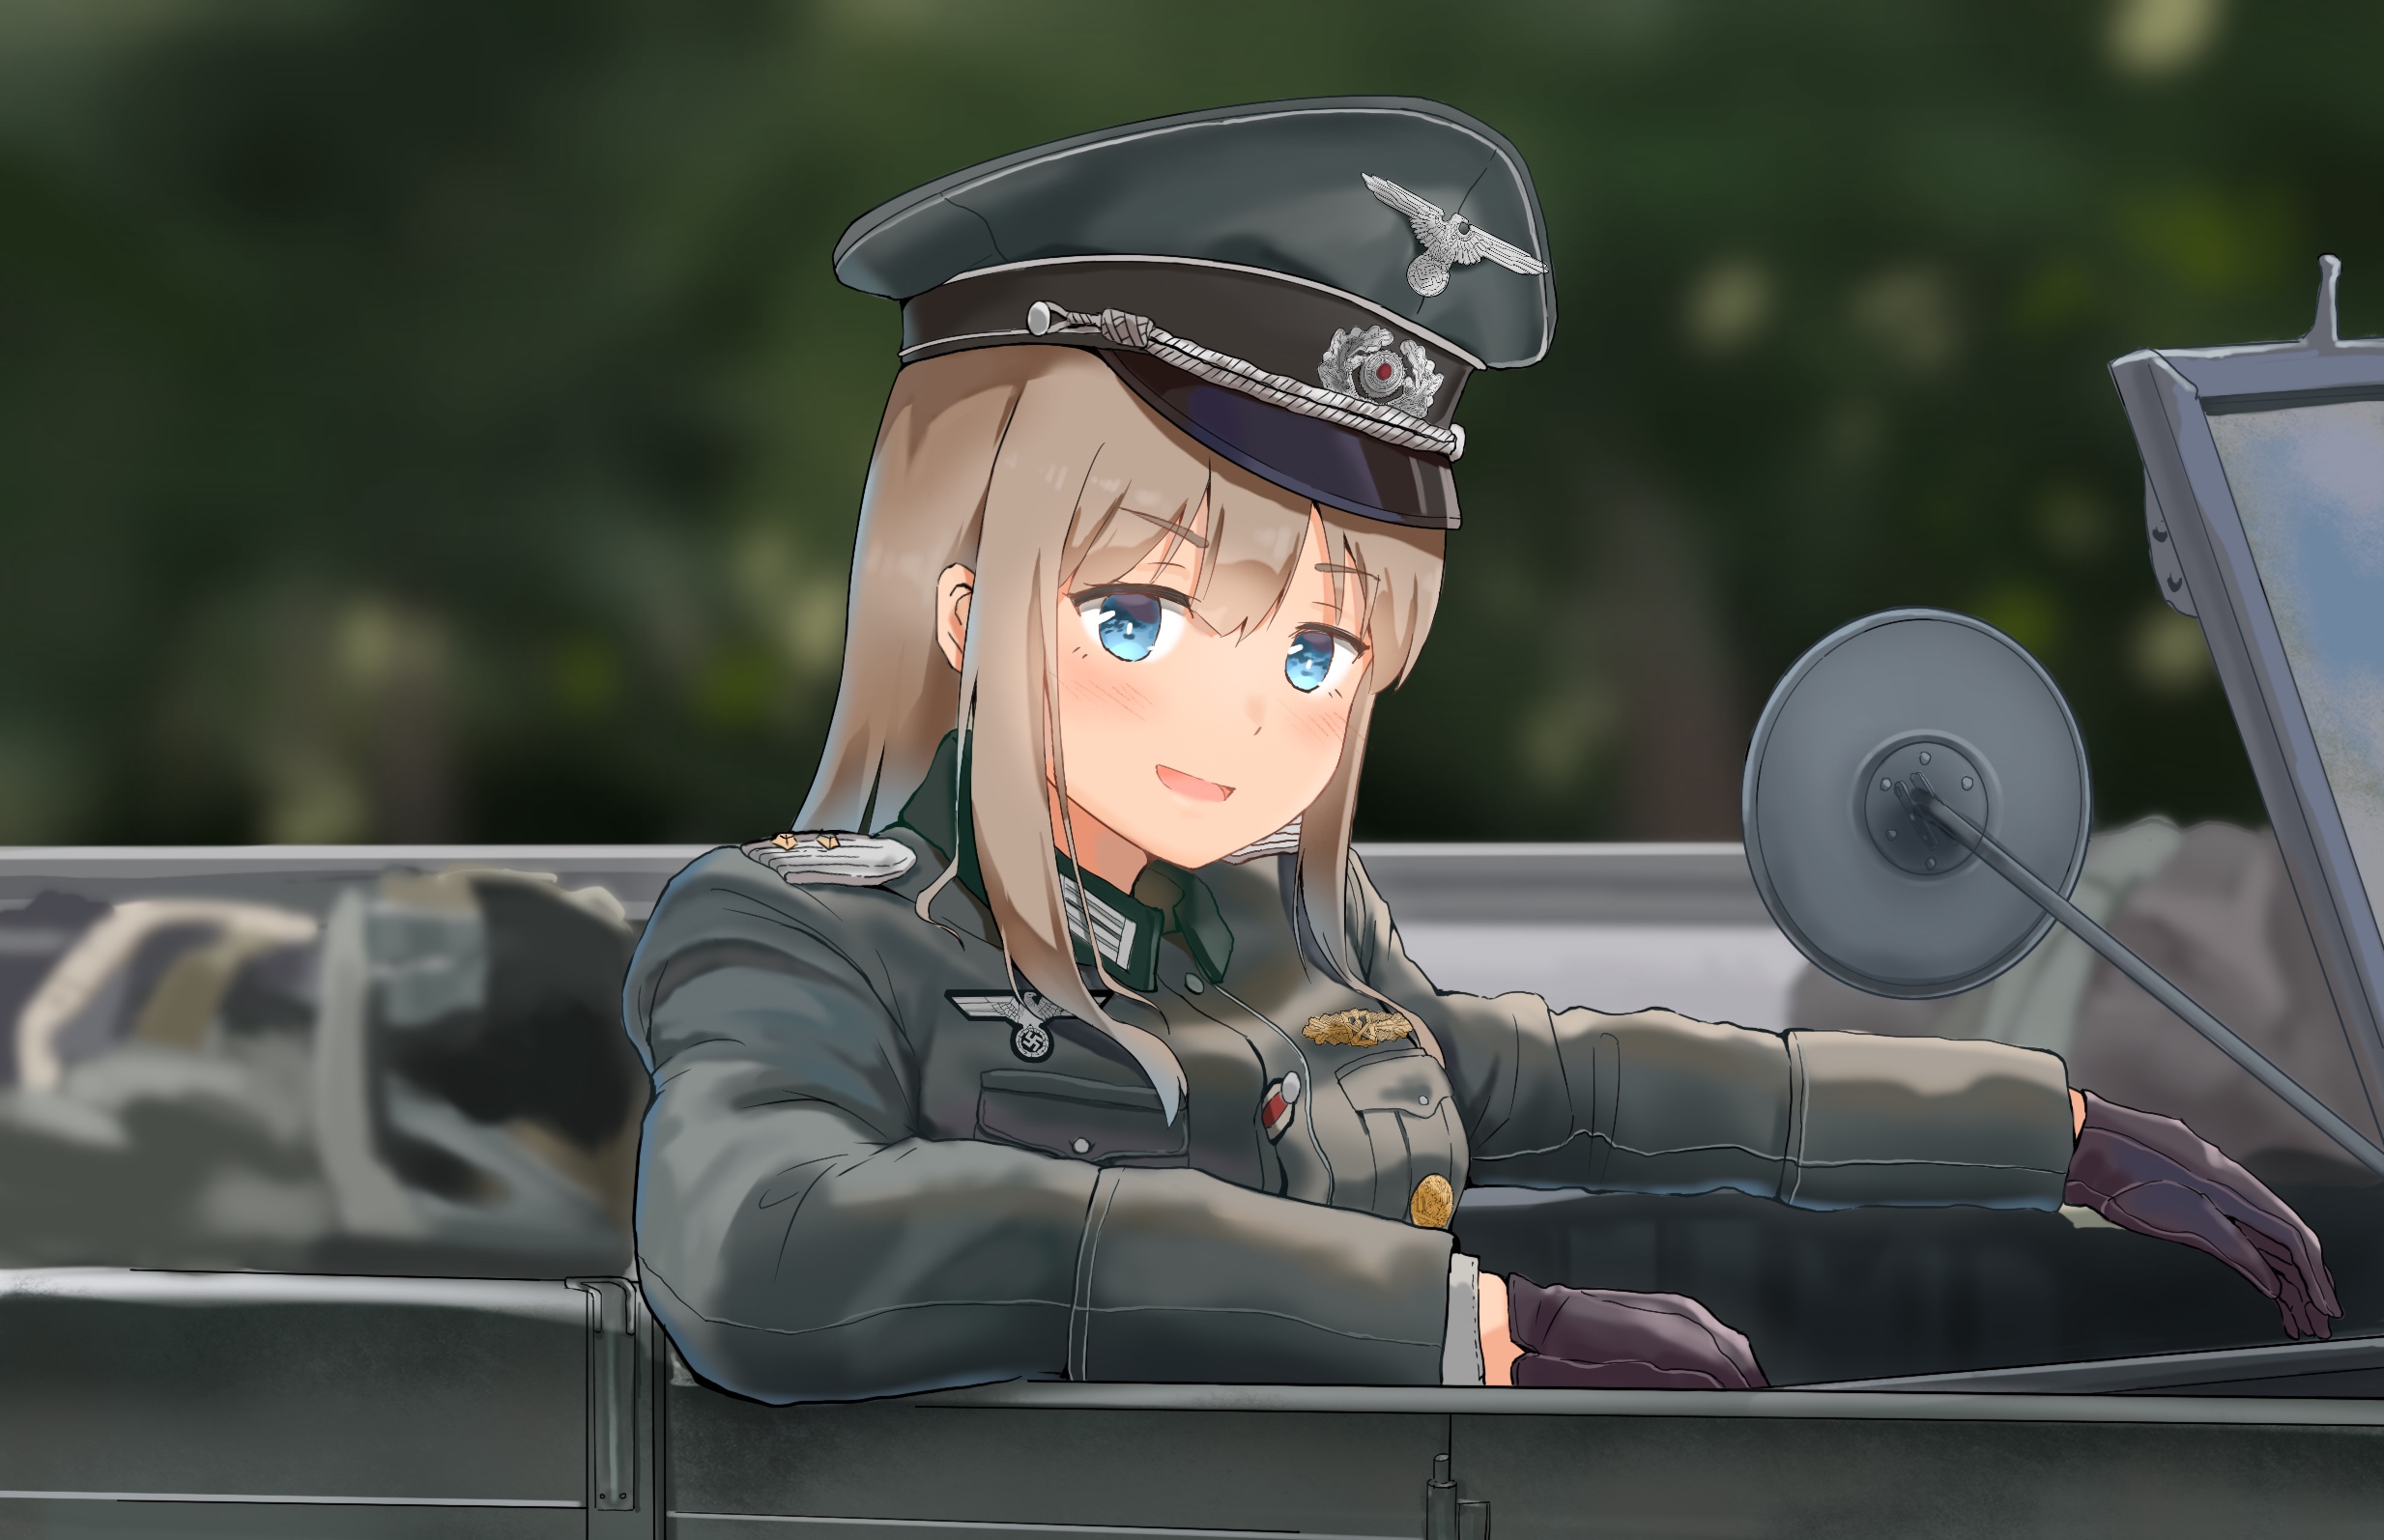 Anime 2467x1594 original characters anime girls blue eyes blonde long hair pale military uniform Military Hat hat Wehrmacht peaked cap car Unicron (Brous) German